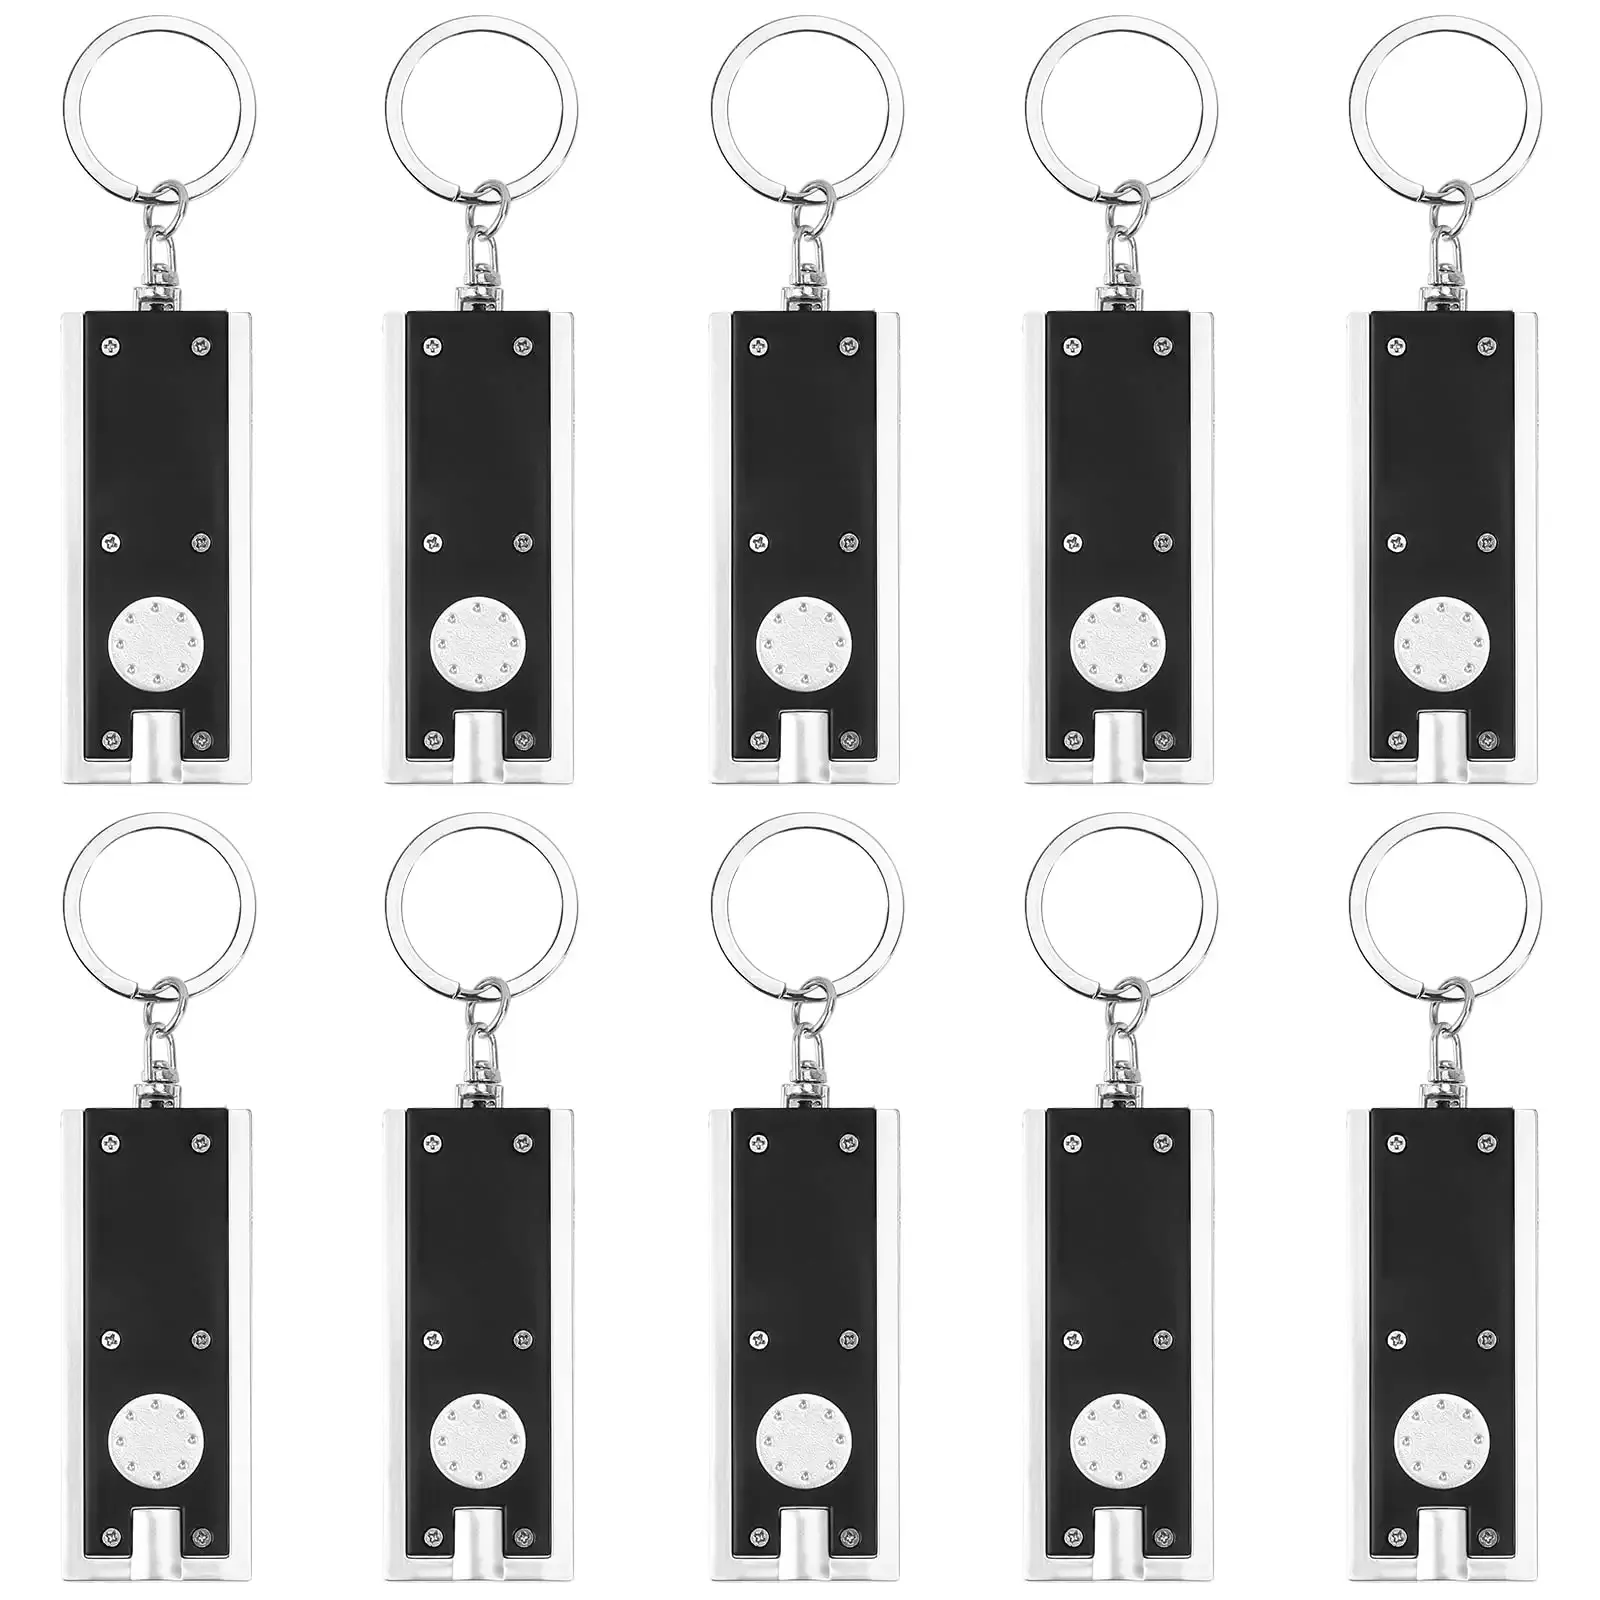 led keychain light mini keychain flashlight badge lights for nurses lights keychain with round ring batteries led key ring light torch white beam shell in seven different color